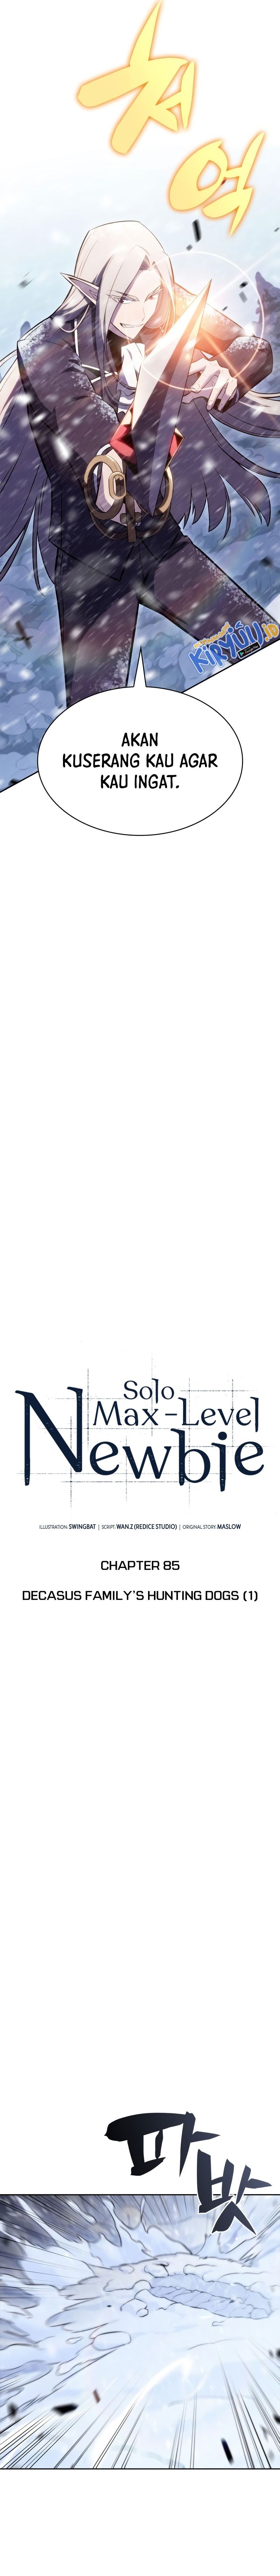 Solo Max-Level Newbie Chapter 85 Image 11